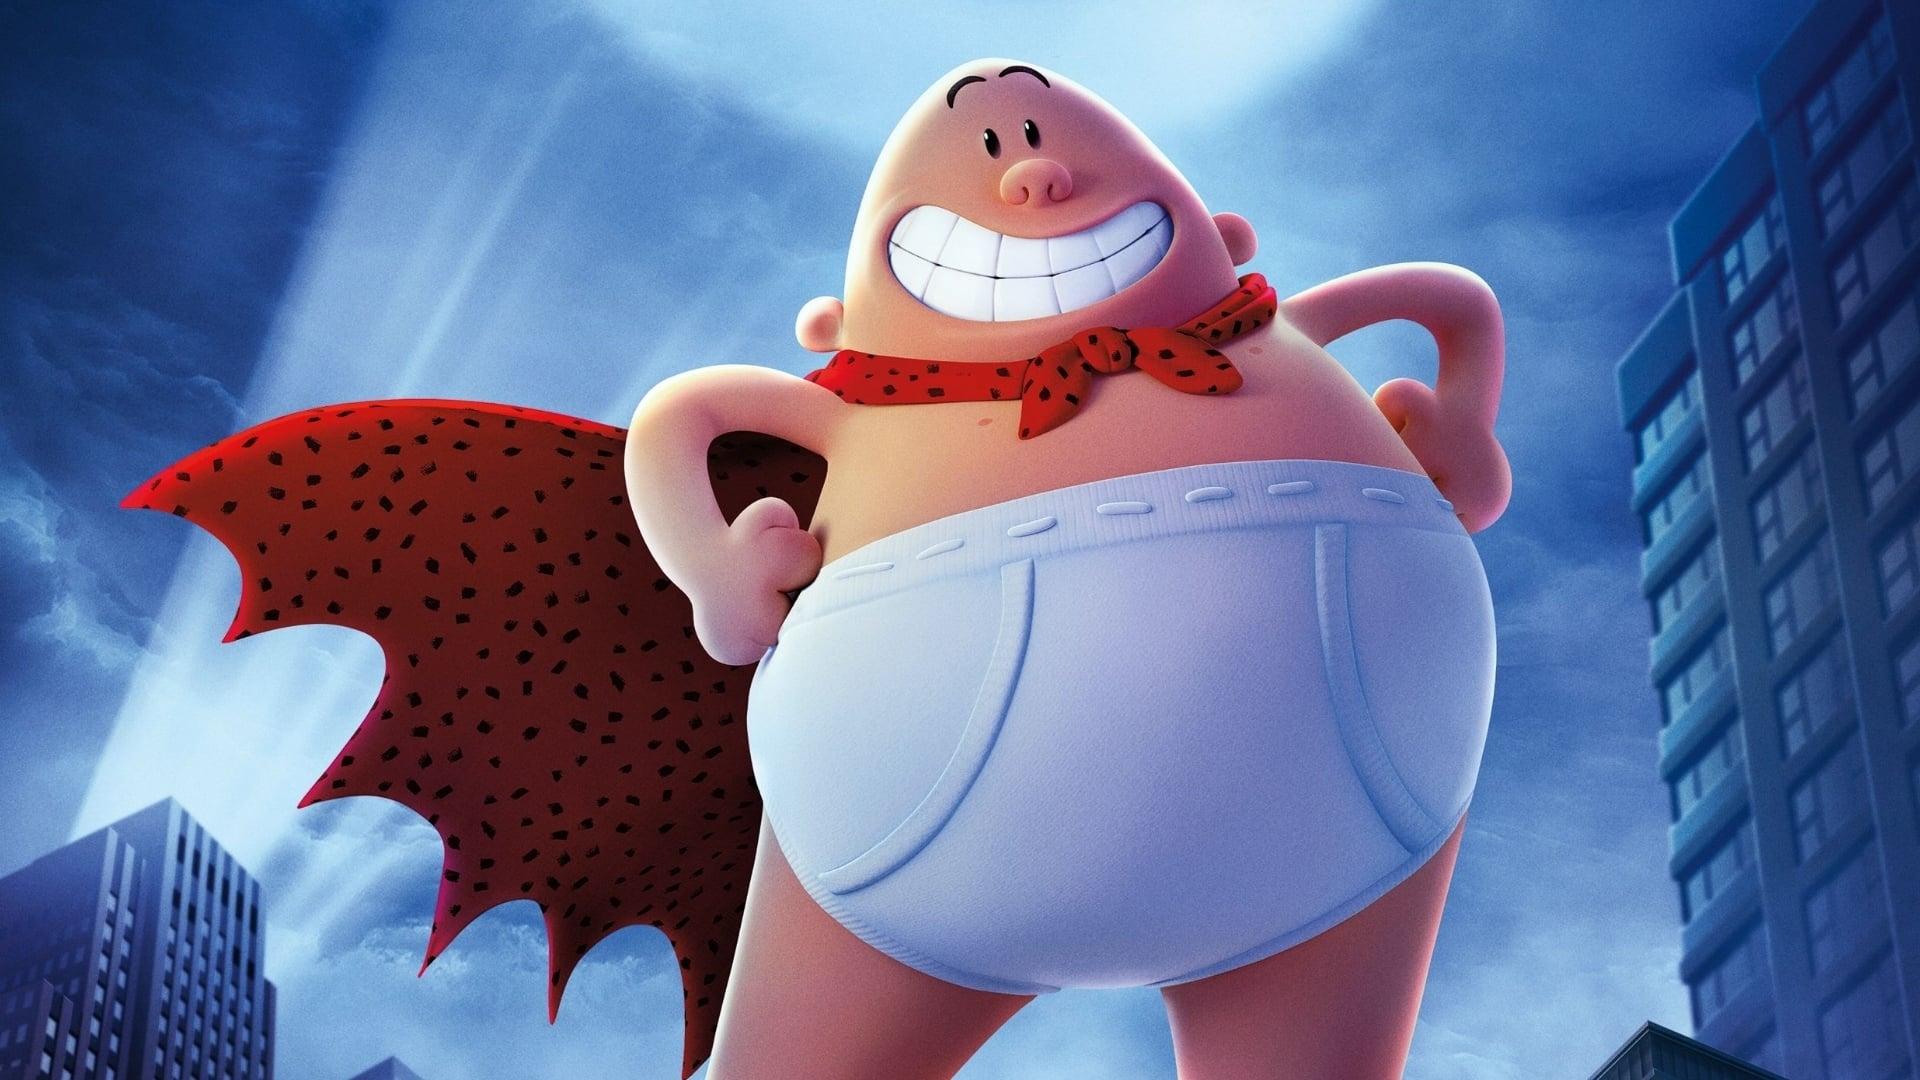 Captain Underpants: The First Epic Movie backdrop